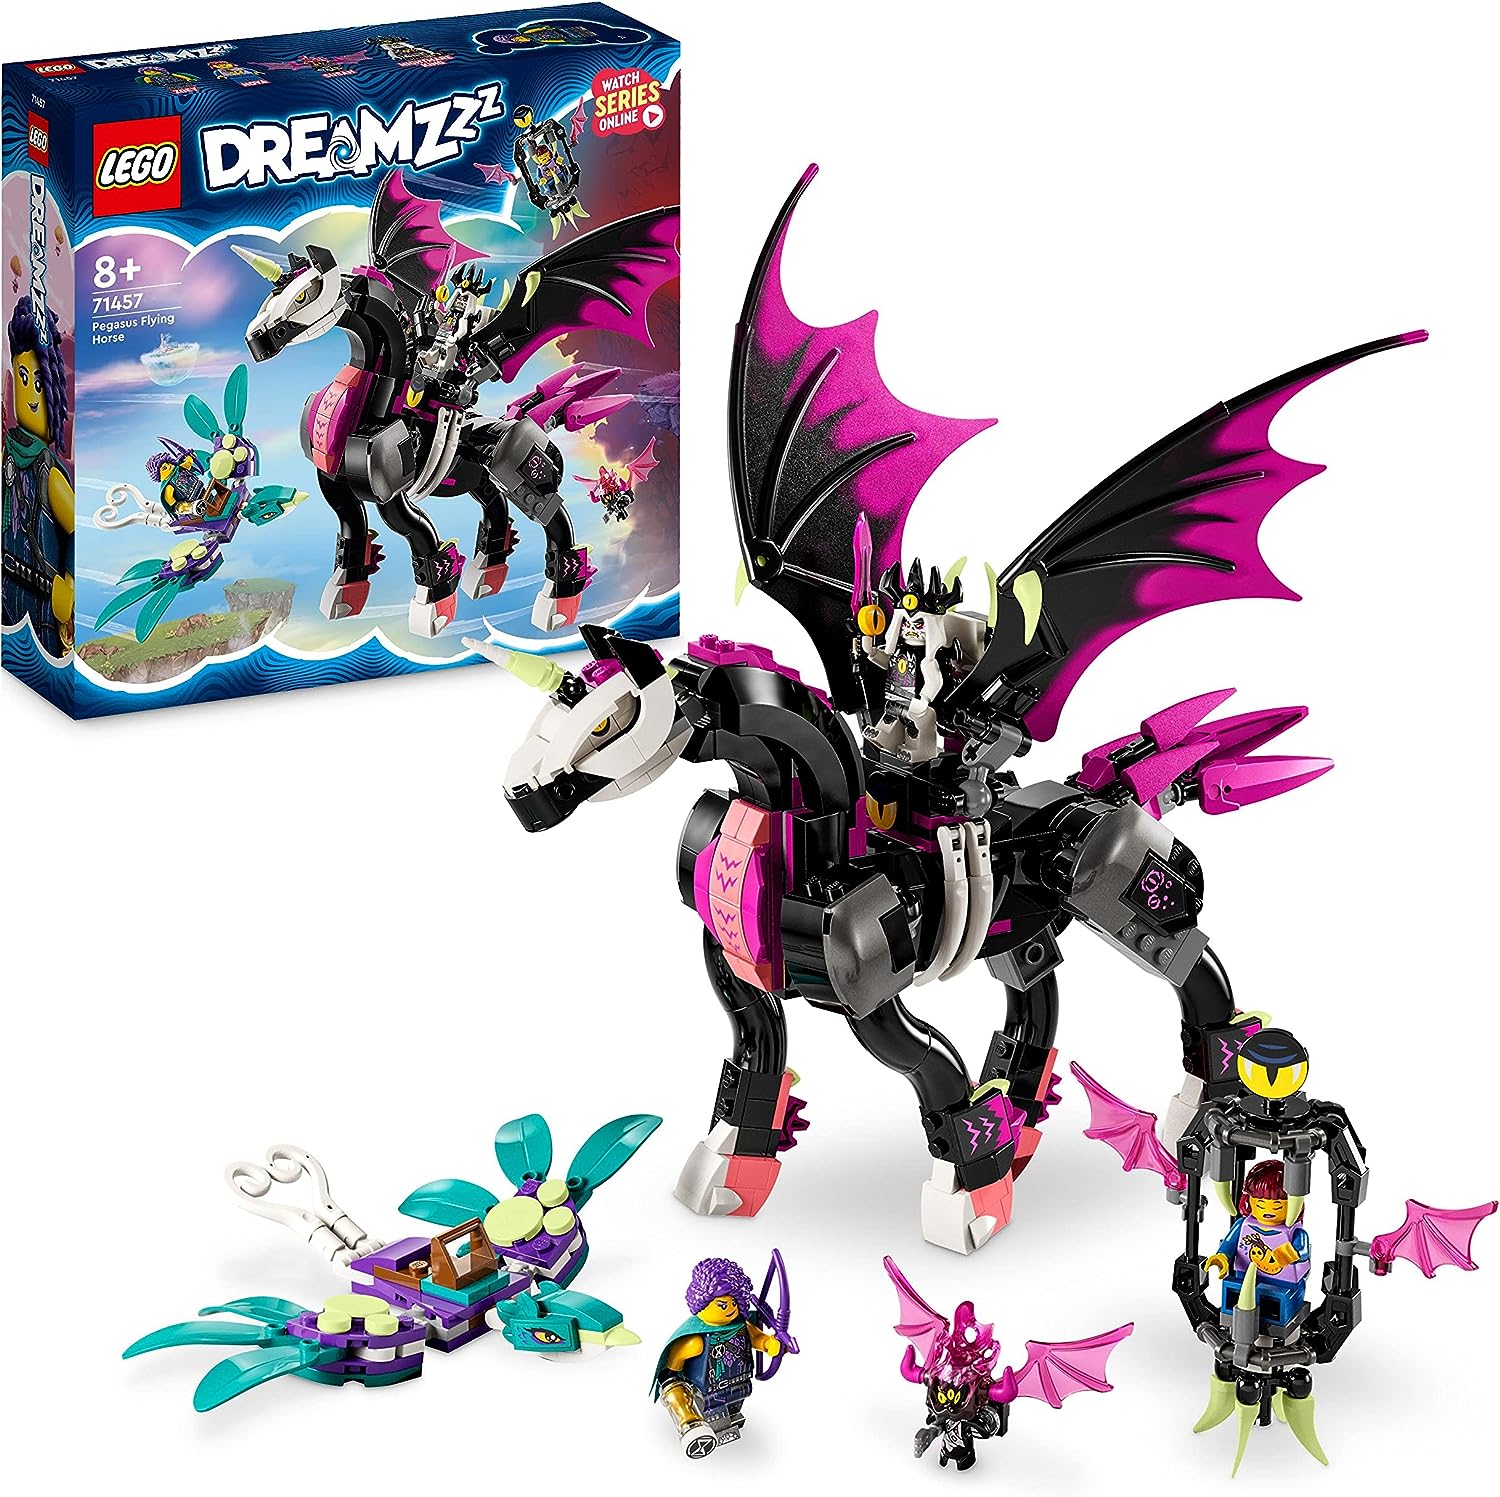 LEGO 71457 DreamZZ Pegasus, Build 2 Types of Horse Toy, Includes Zoey, Nova and Nightmare King as TV Show Mini Figures, Creative Animal Toy for Kids